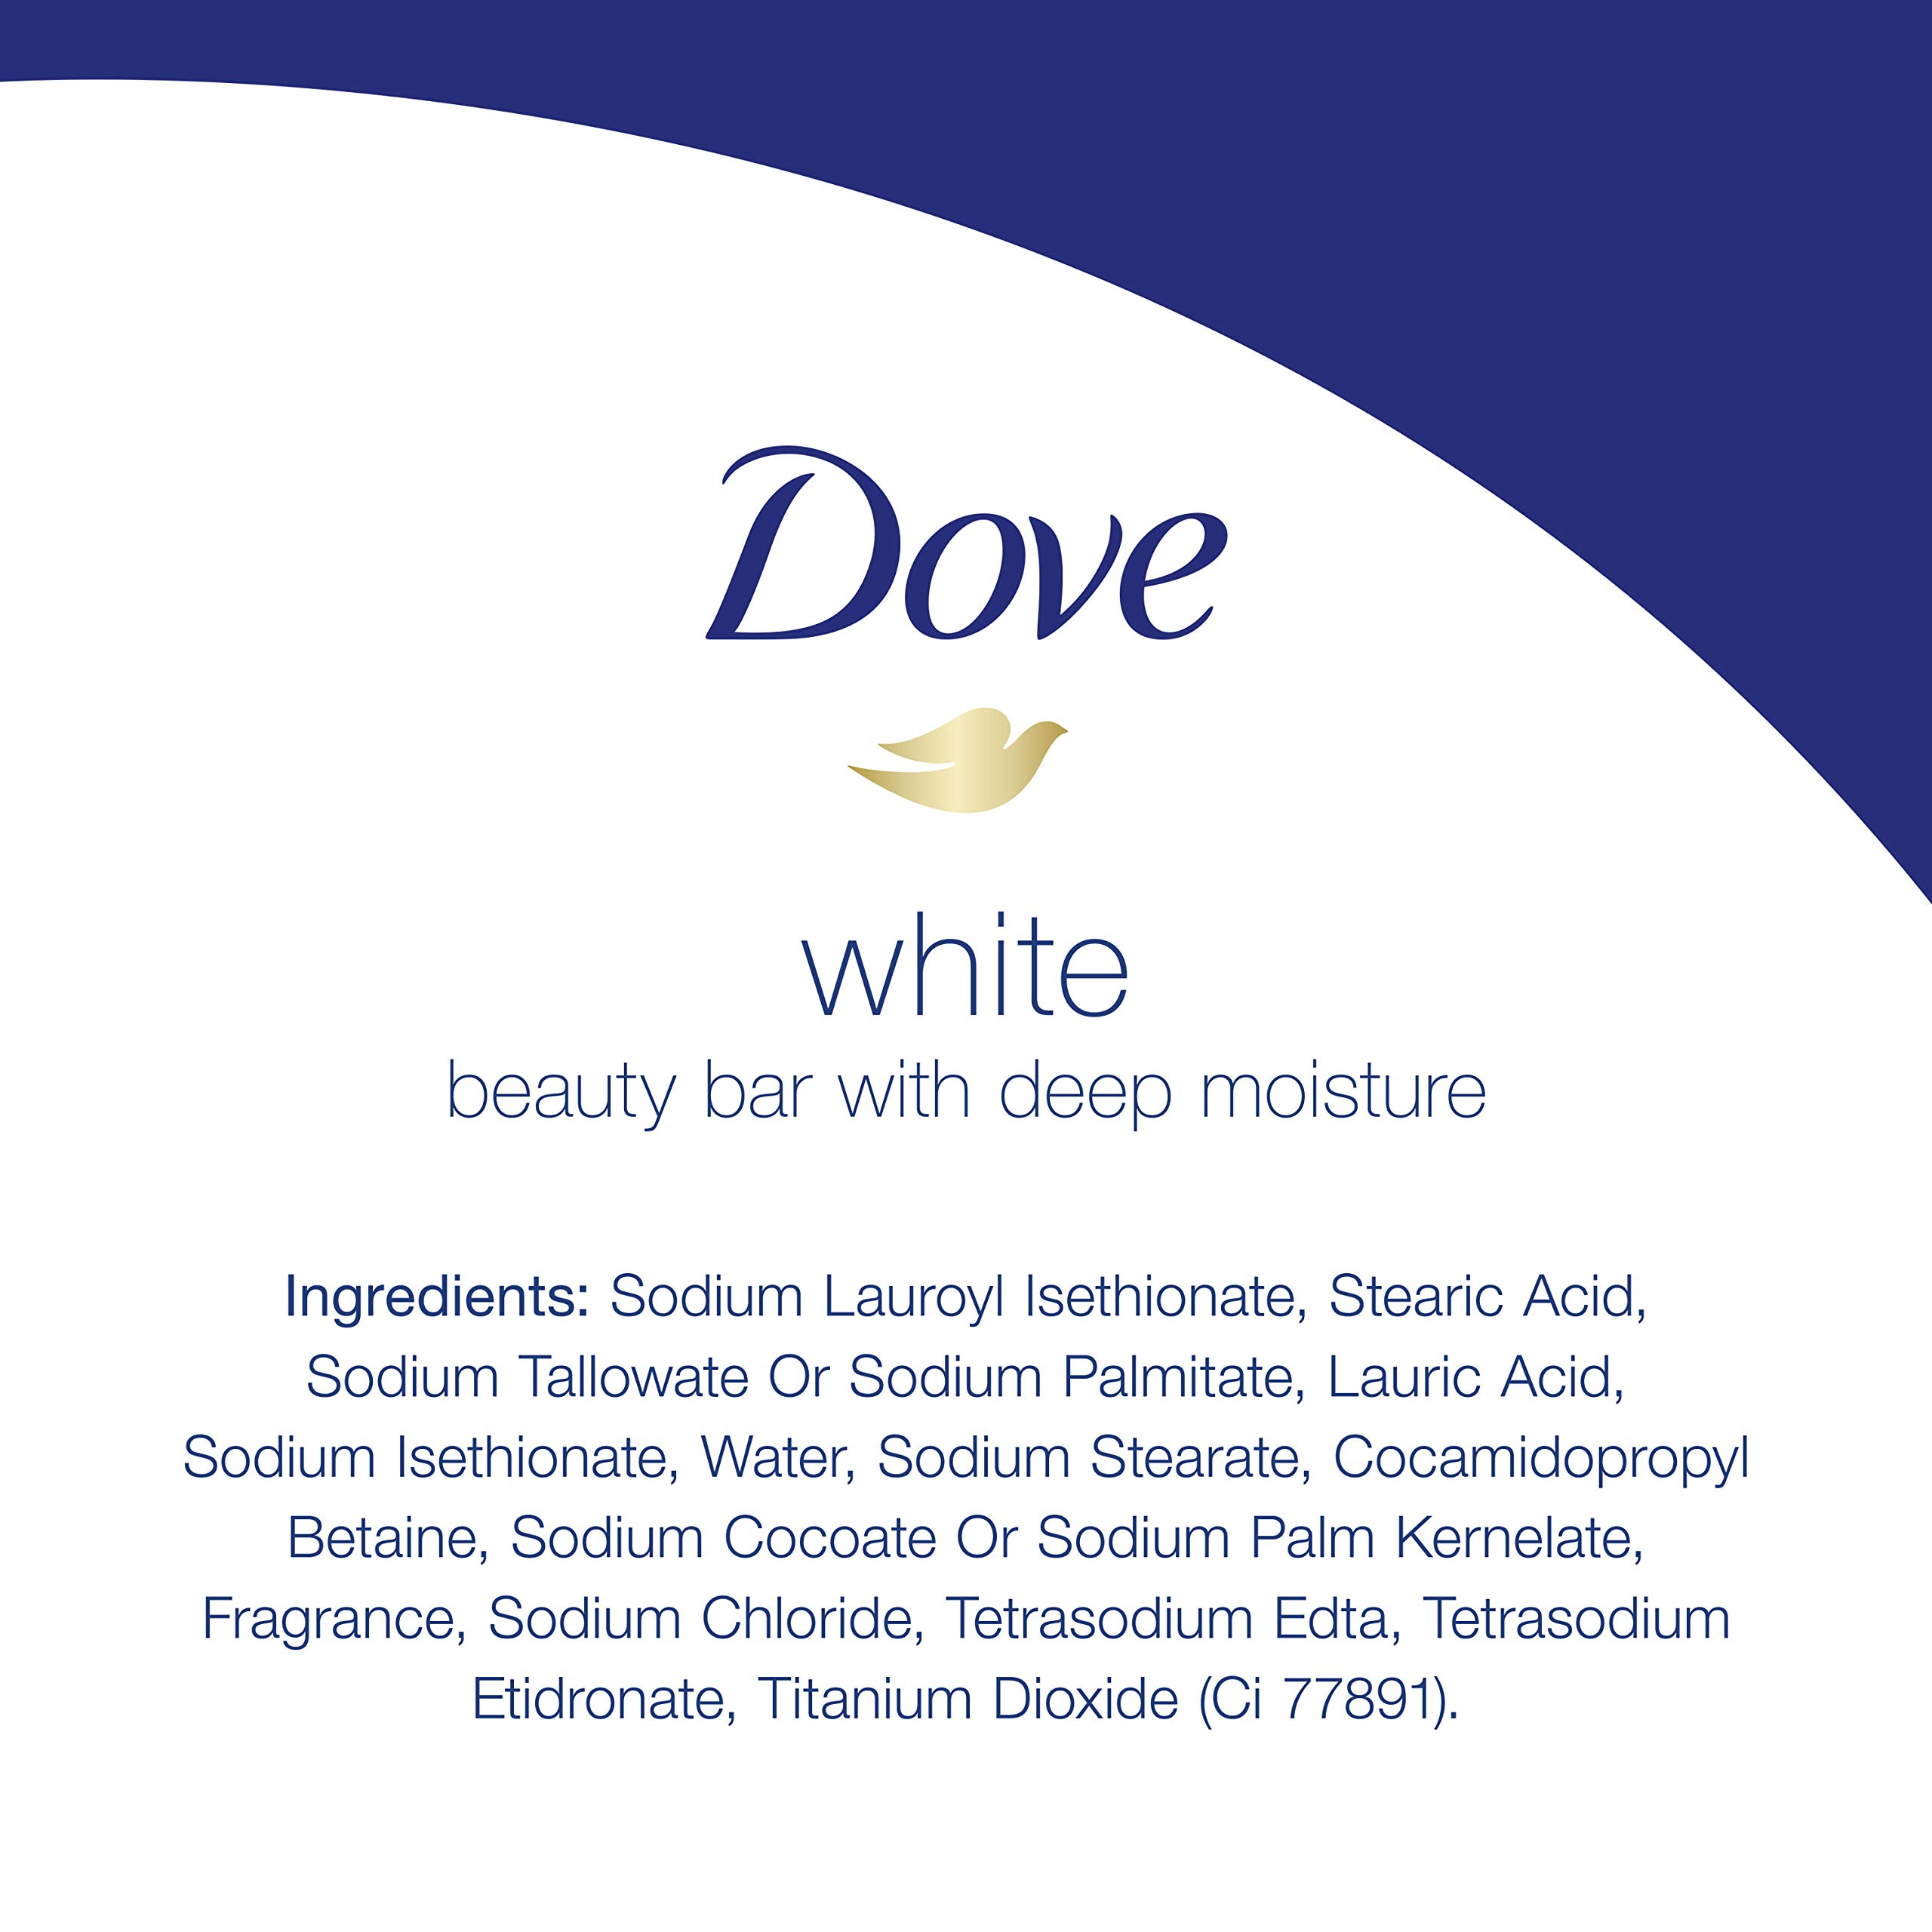 Dove Beauty Bar Gentle Cleanser gor Softer and Smoother Skin with 1/4 Moisturizing Cream White Effectively Washes Away Bacteria, Nourishes Your Skin, 3.75 Ounce (Pack of 2)